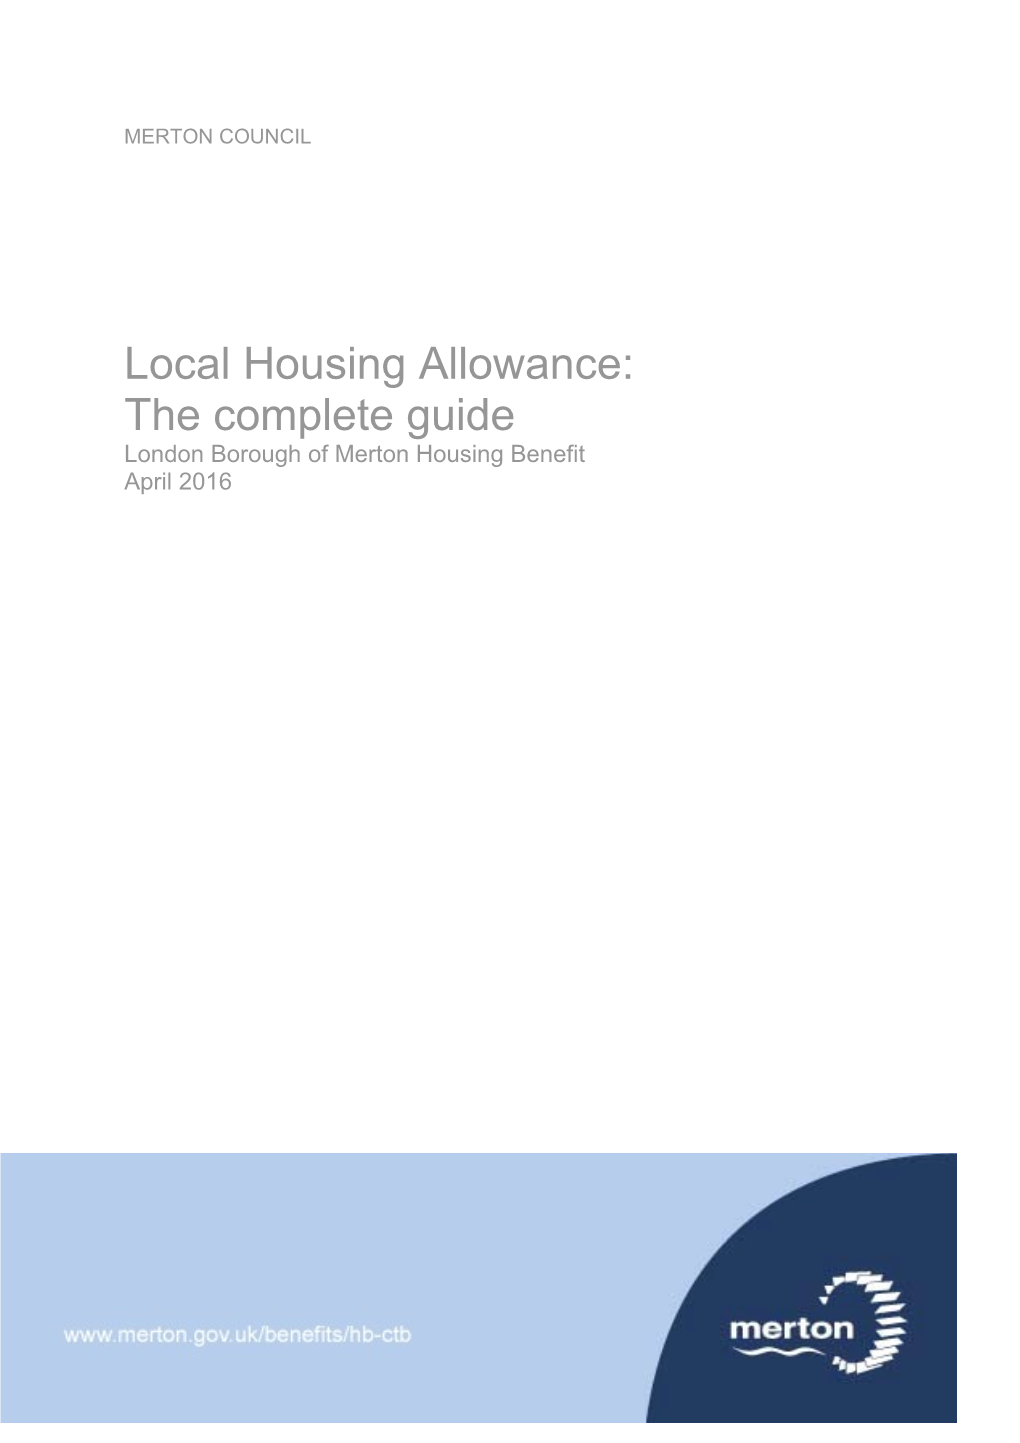 Background to Local Housing Allowance (LHA) 3